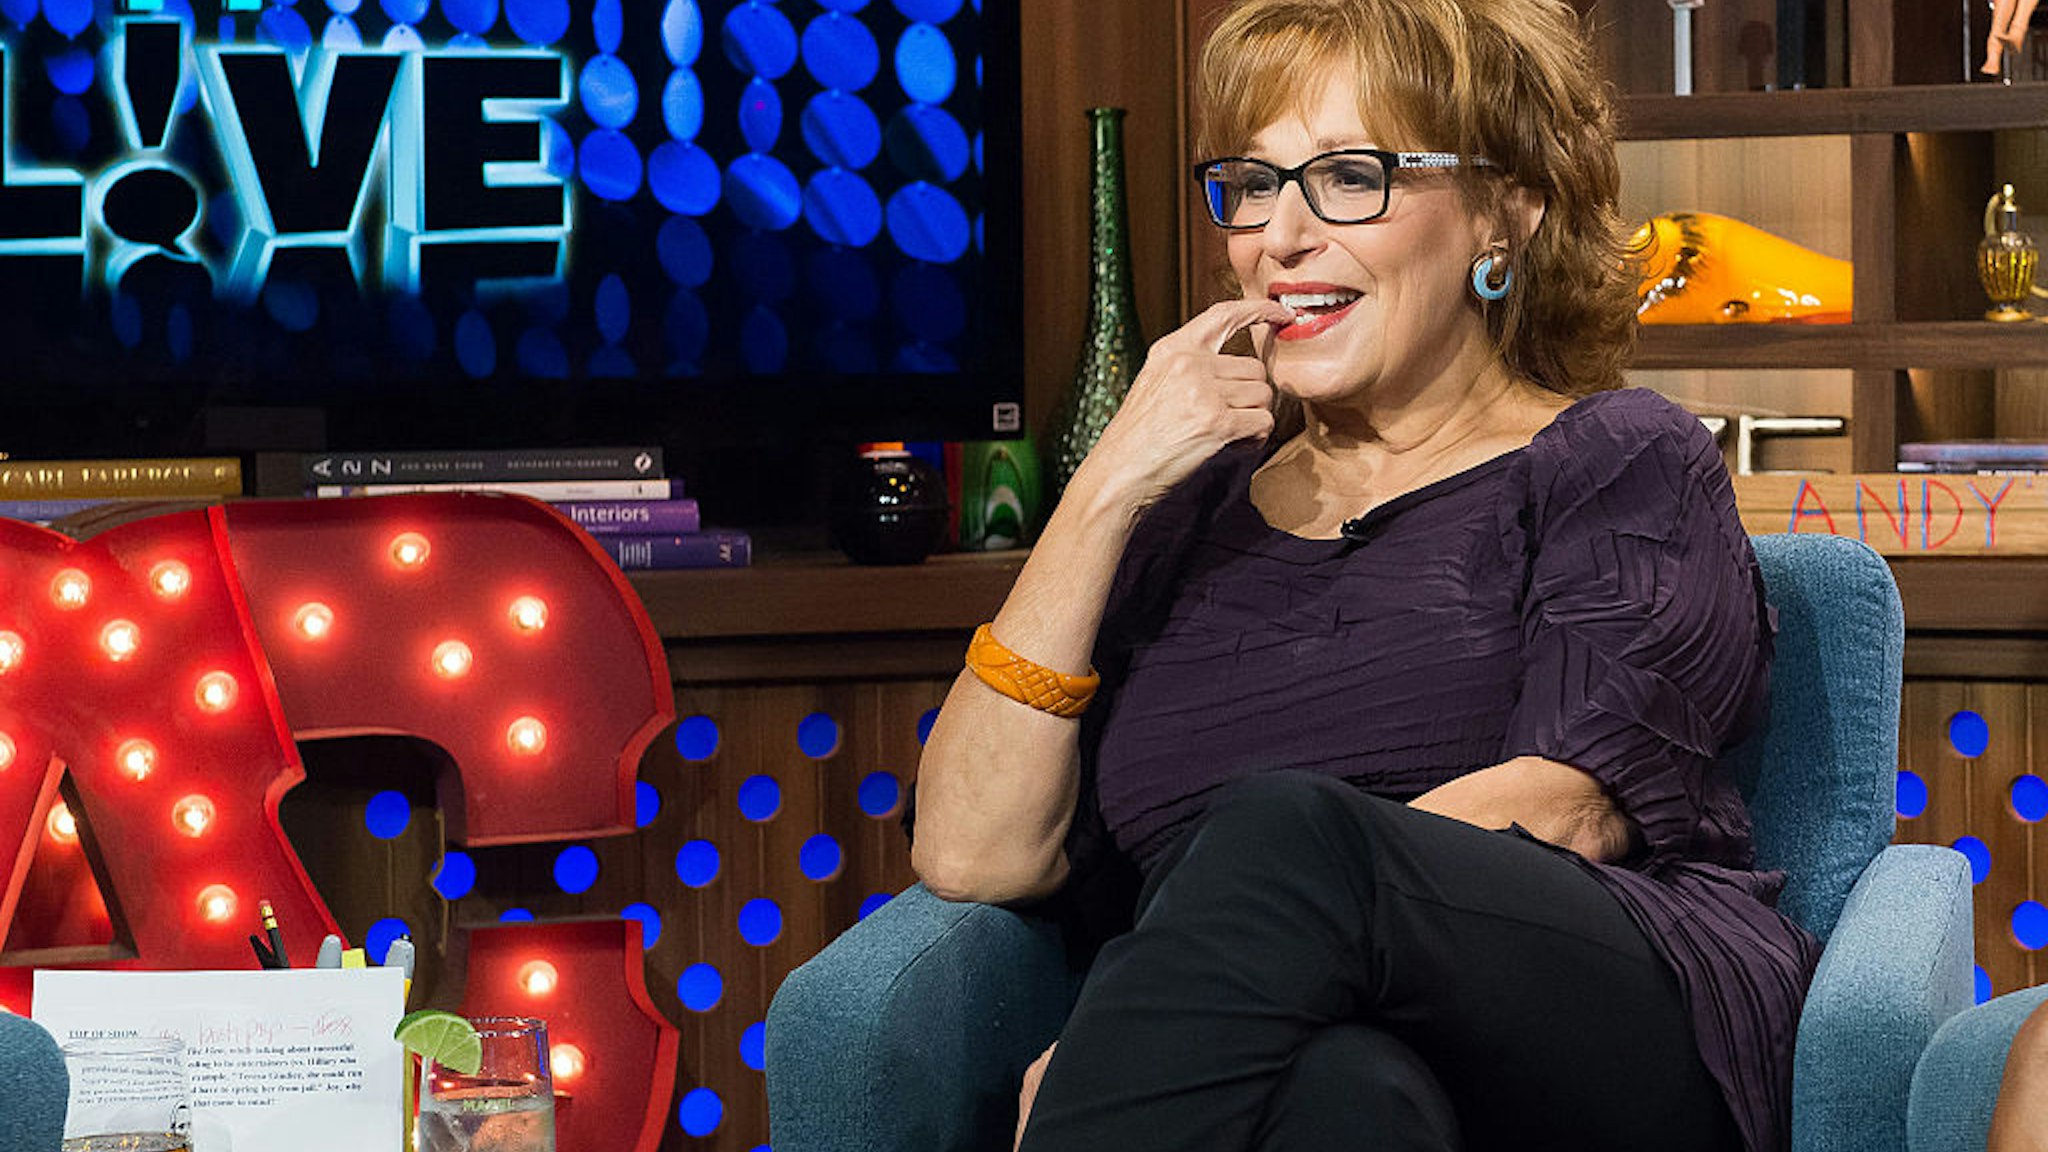 WATCH WHAT HAPPENS LIVE -- Pictured: Joy Behar -- (Photo by: Charles Sykes/Bravo/NBCU Photo Bank/NBCUniversal via Getty Images)